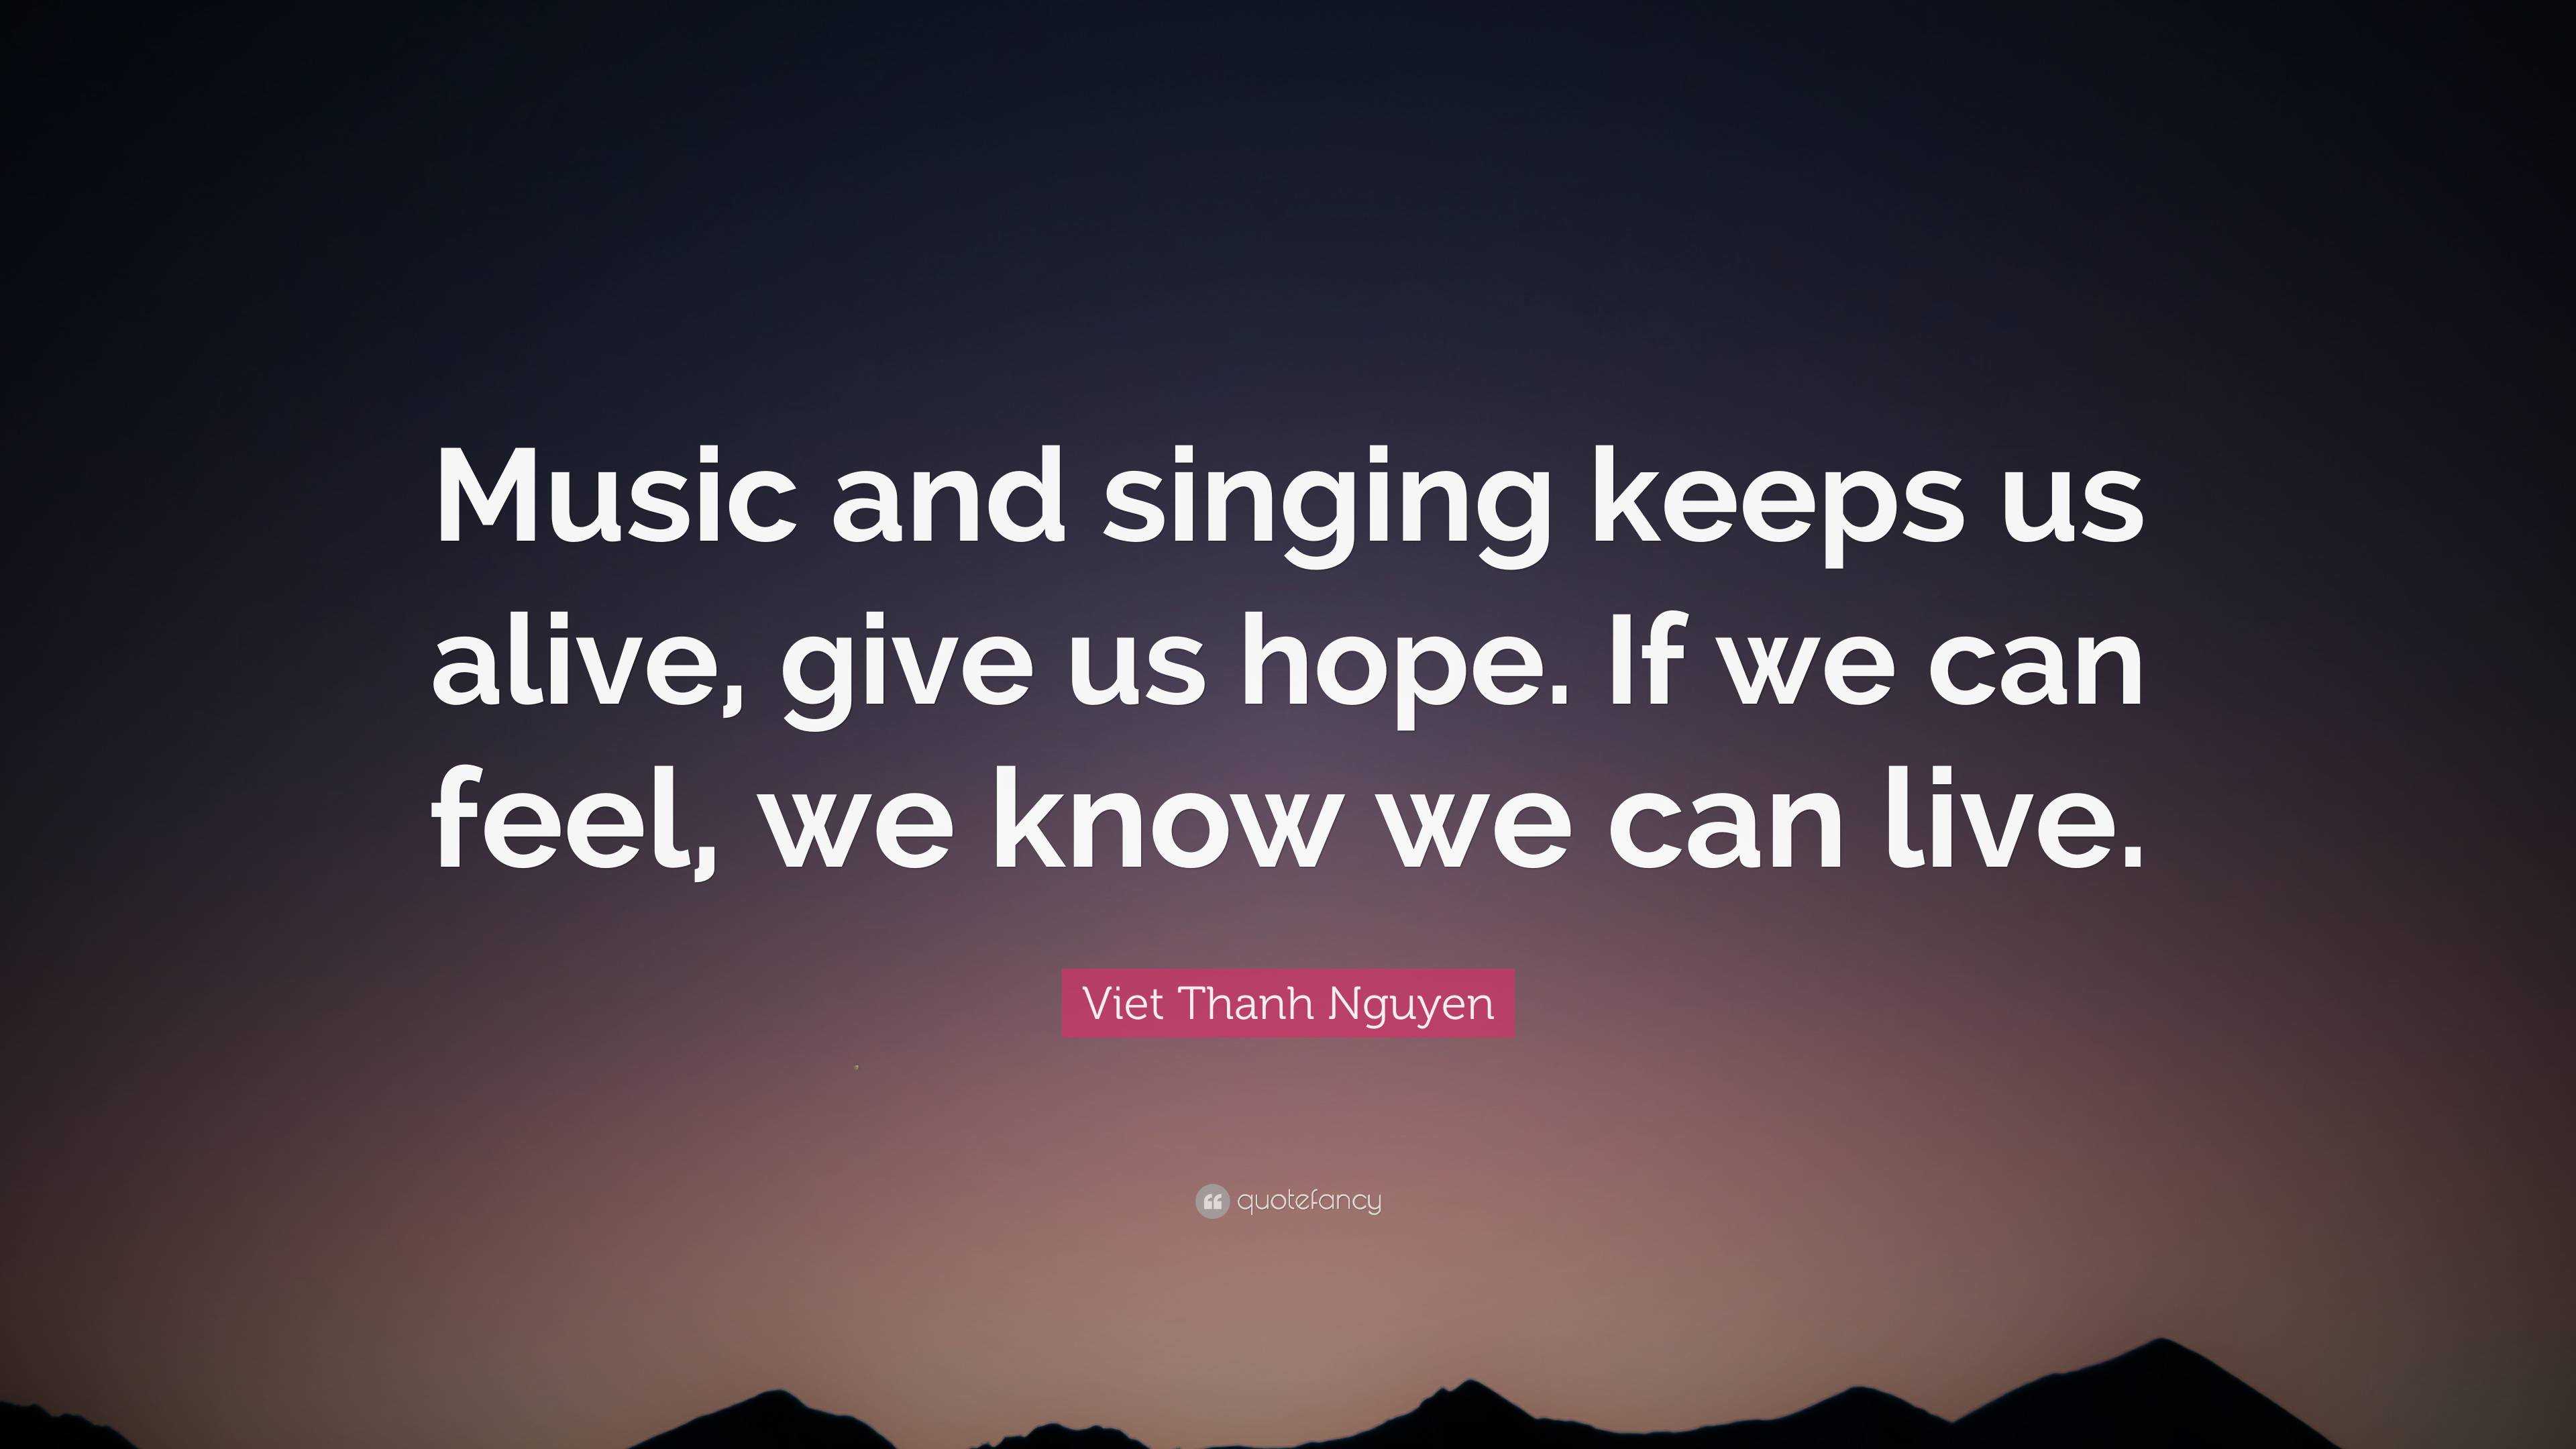 Viet Thanh Nguyen Quote: “Music and singing keeps us alive, give us ...